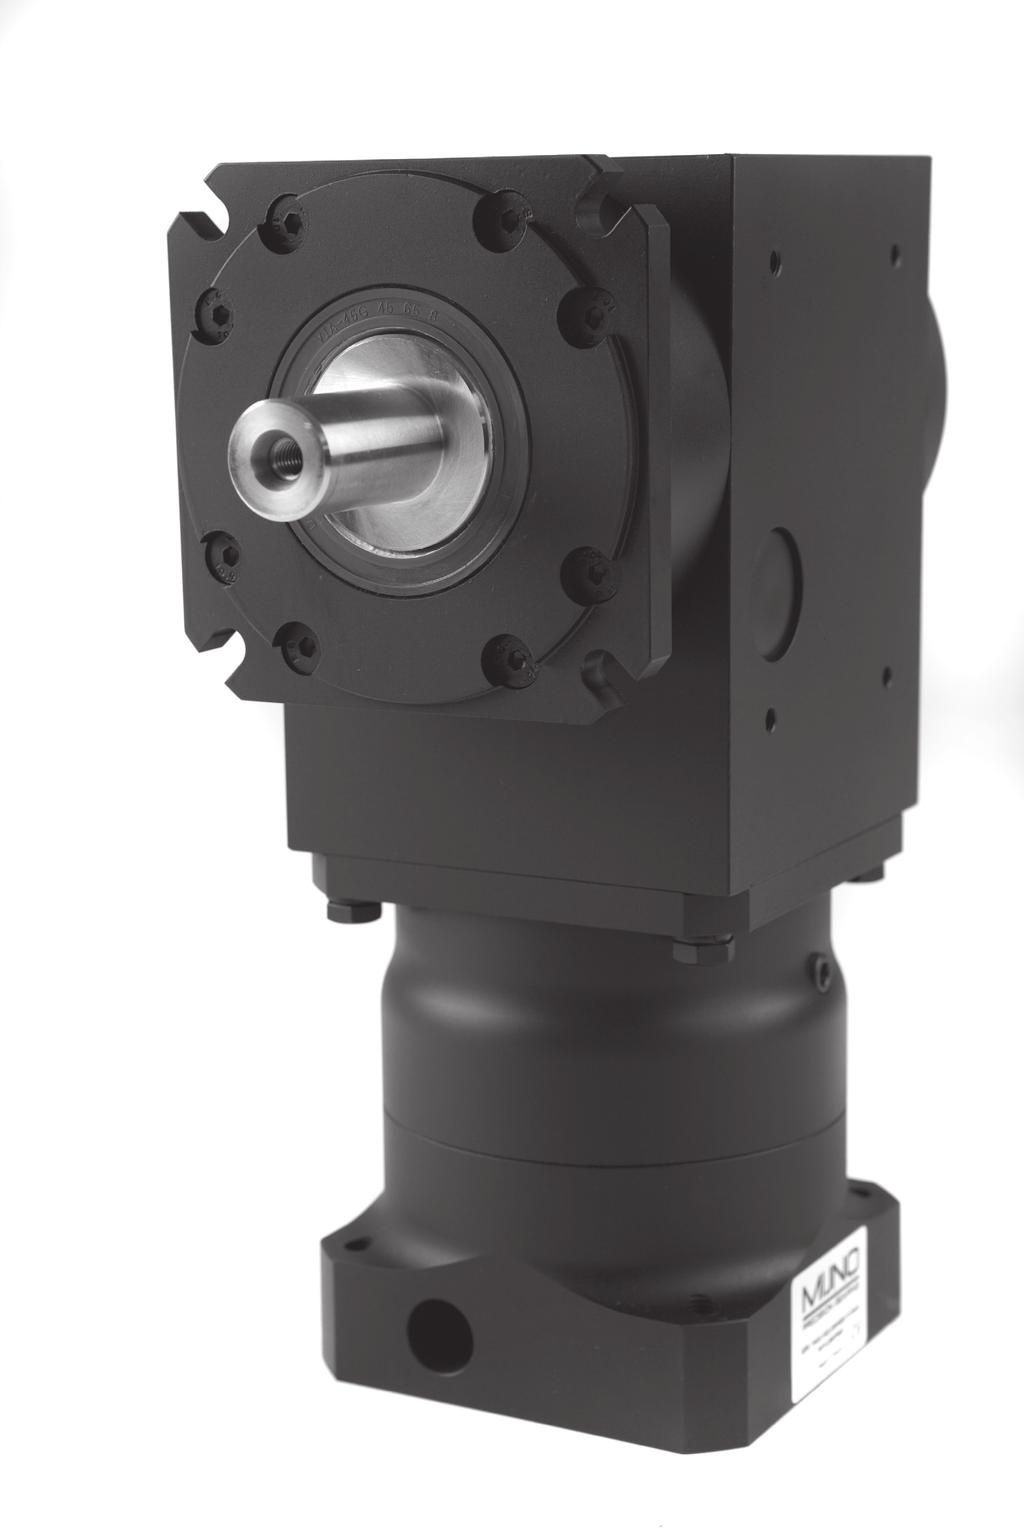 MRA / bdr lines Heavy duty, planetary to bevel, right-angle, servo gearbox Up to 350 Nm rated with bevel Up to 9,000 Nm rated with planetary Backlash: from 15 to 2 minutes* Hollow shaft, double shaft